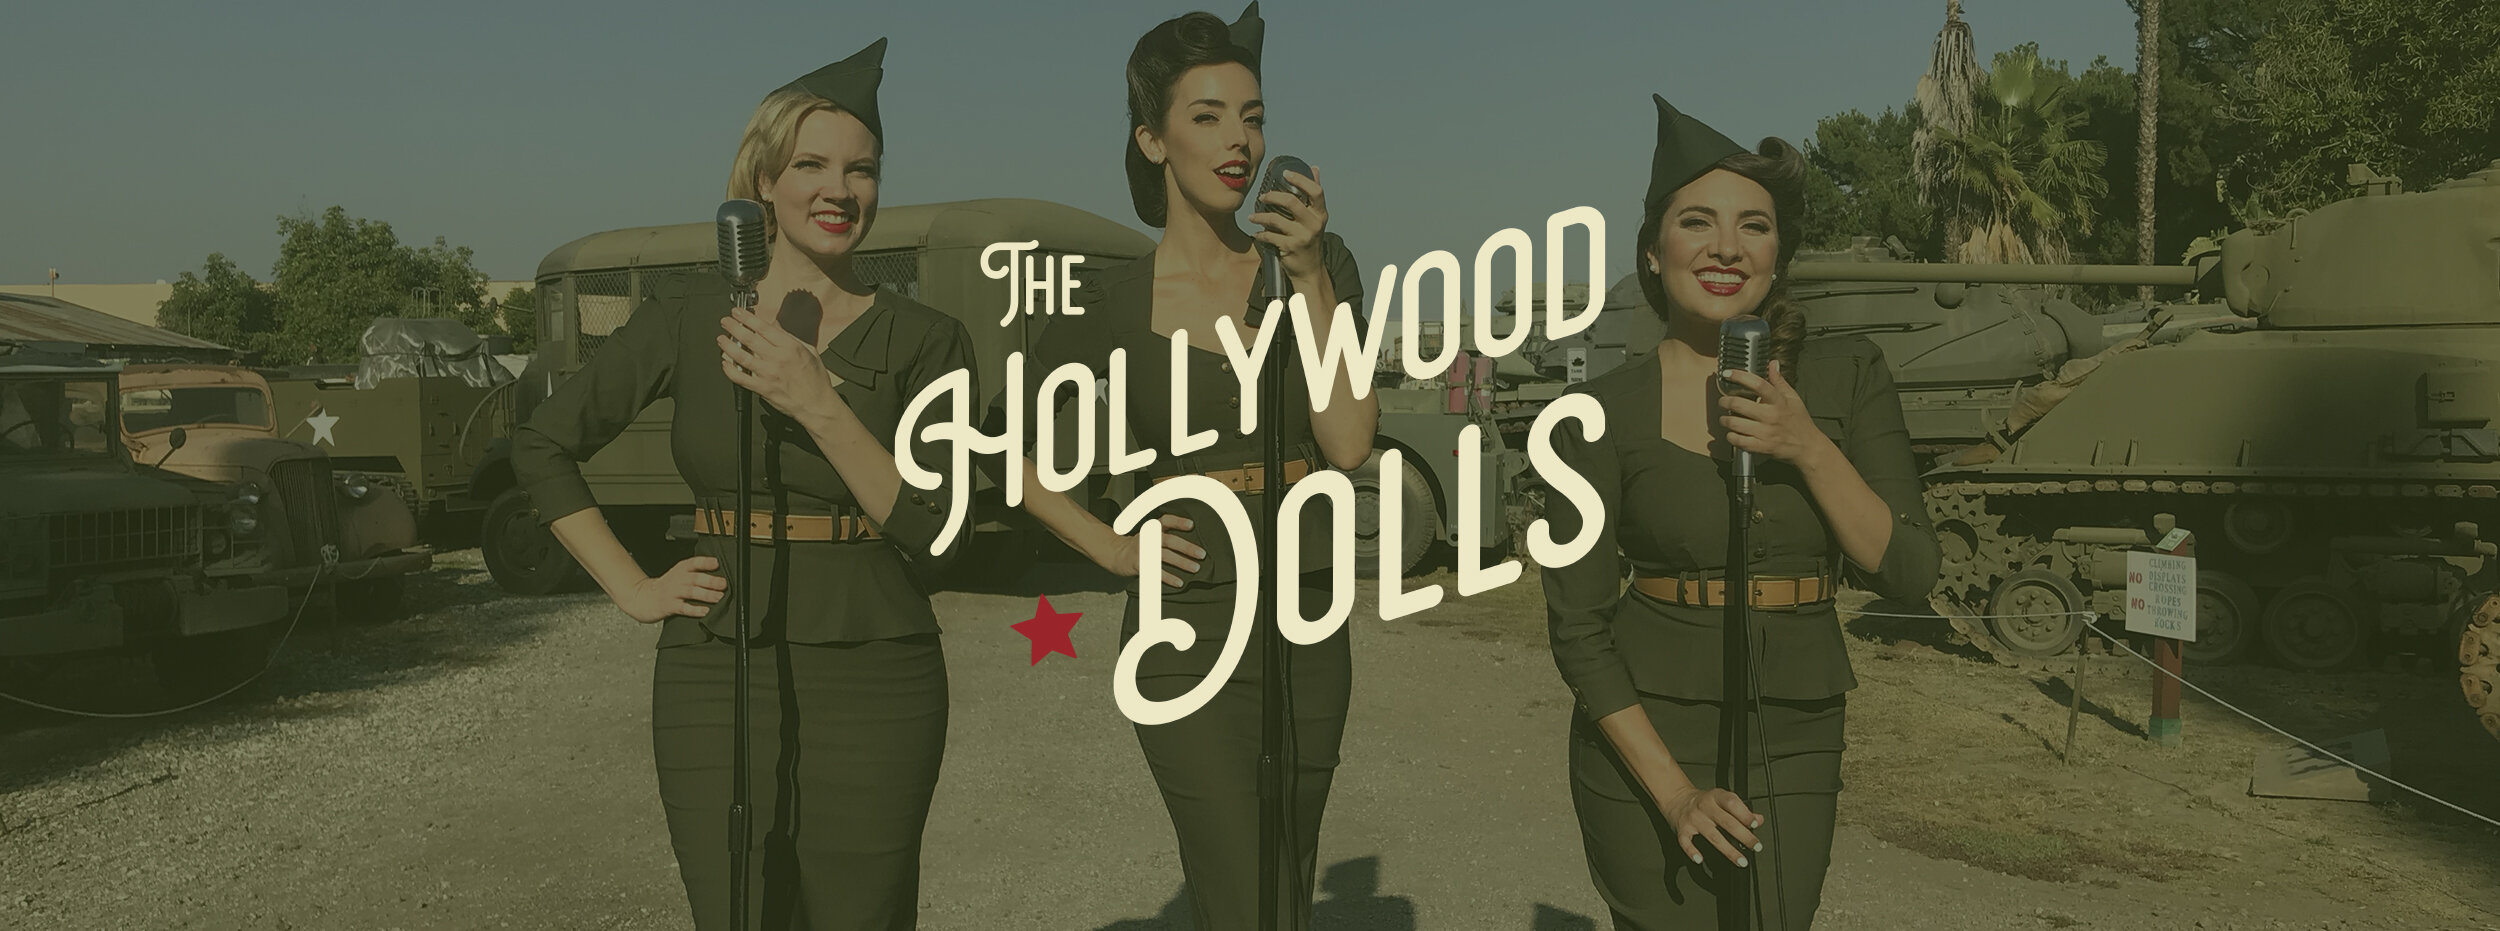 The Hollywood Dolls | 1940s